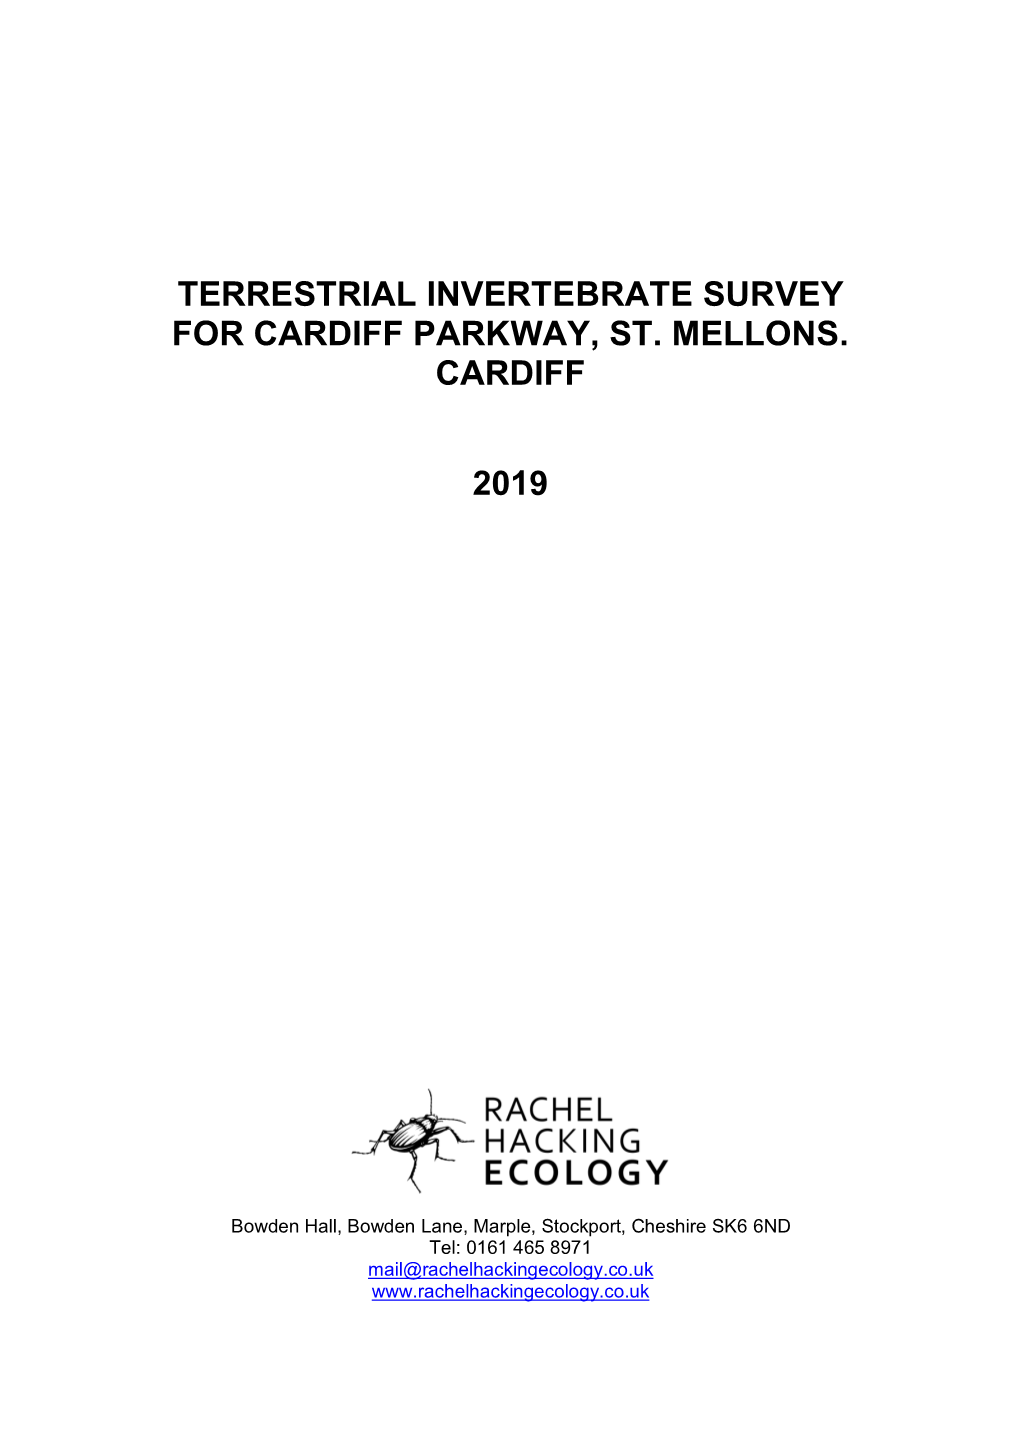 Terrestrial Invertebrate Survey for Cardiff Parkway, St. Mellons, Cardiff